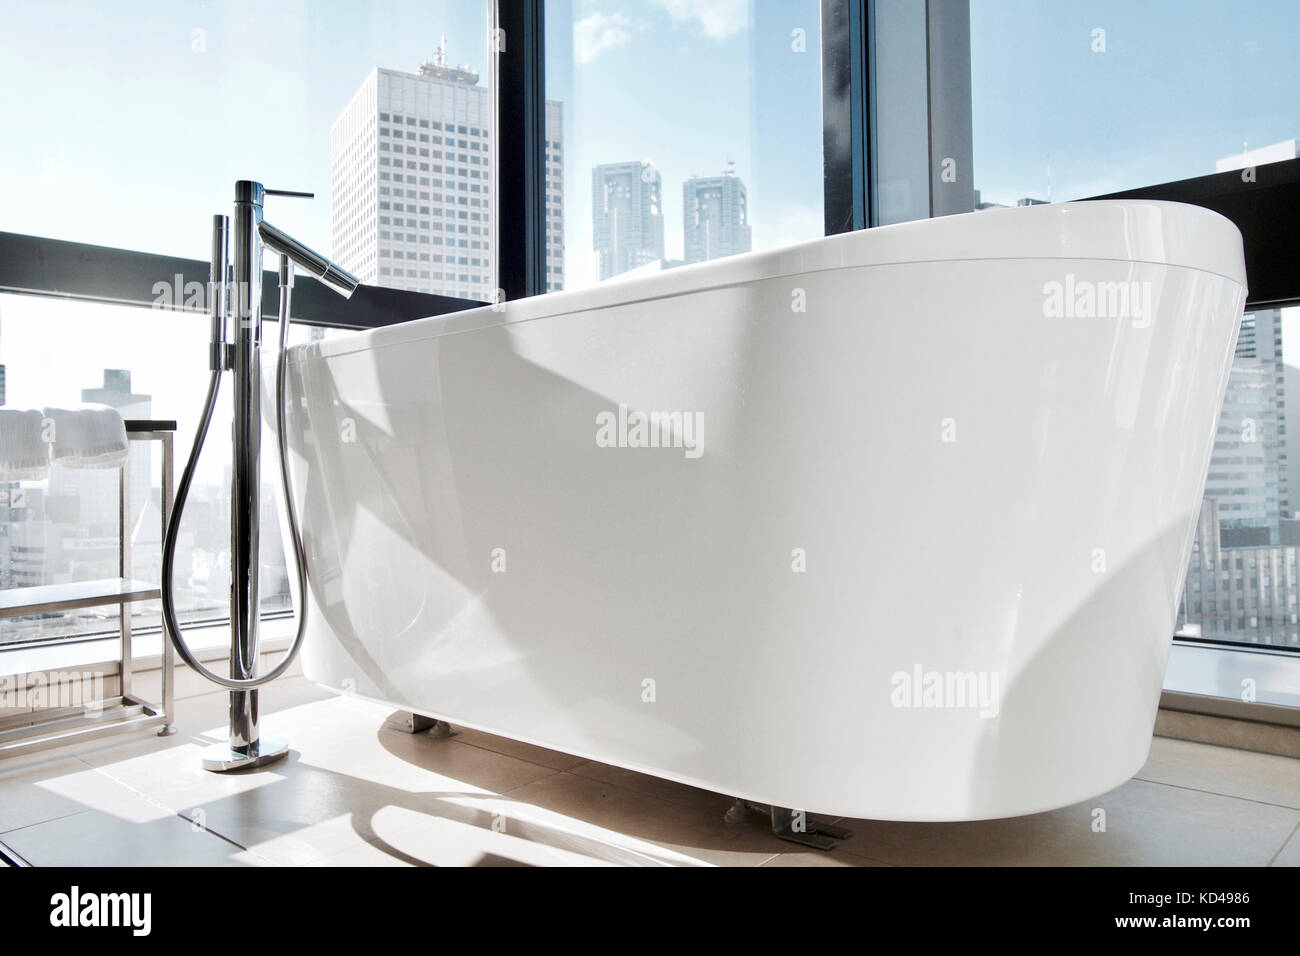 A freestanding Bathtub at a hotel in Japan with clear view of the buildings at Shinjuku Stock Photo